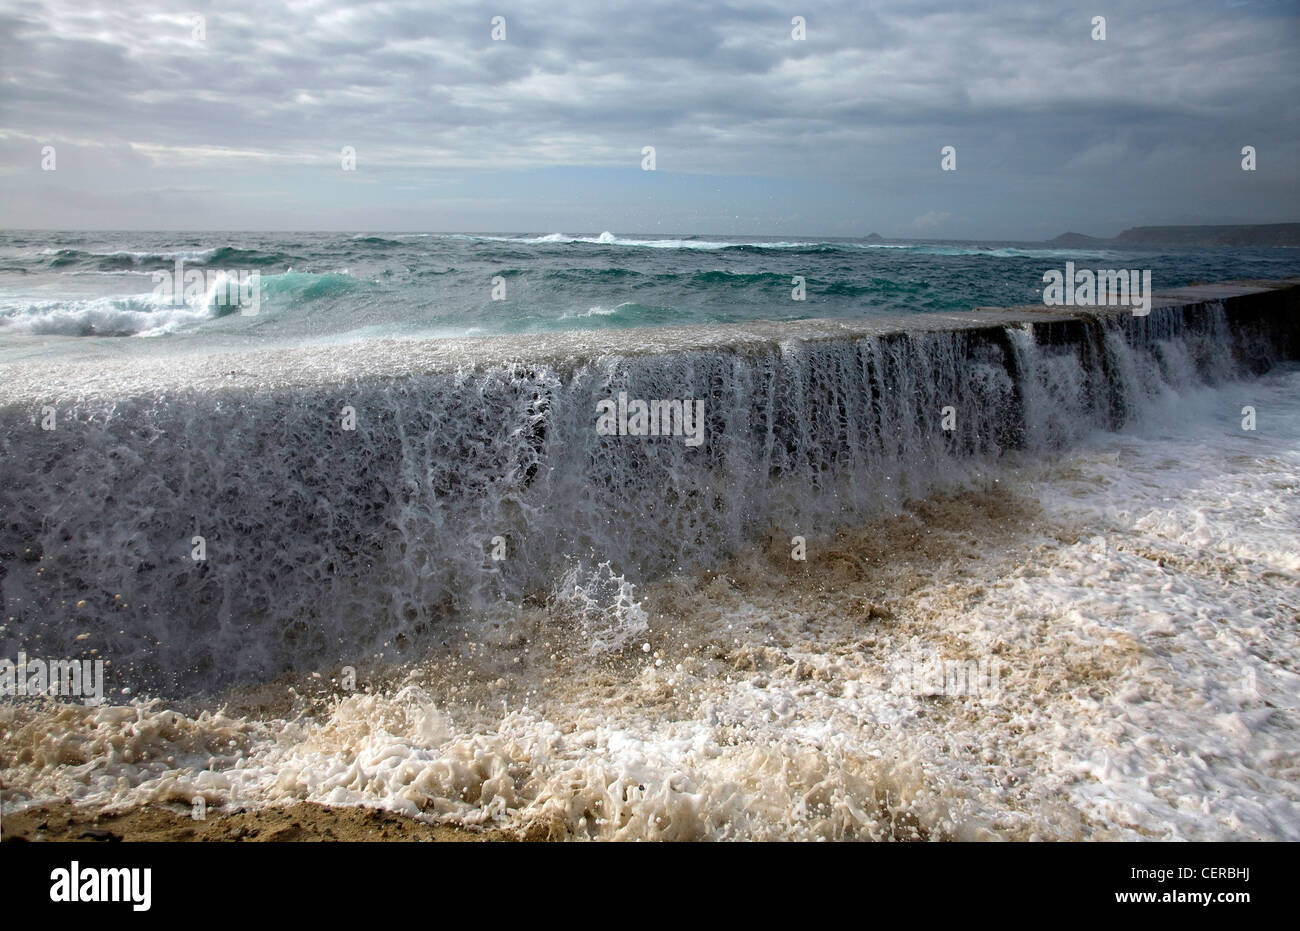 Atlantic storms driving tidal surge and waves crashing forcefully over the breakwater with dramatic force, destroying the beach. Stock Photo